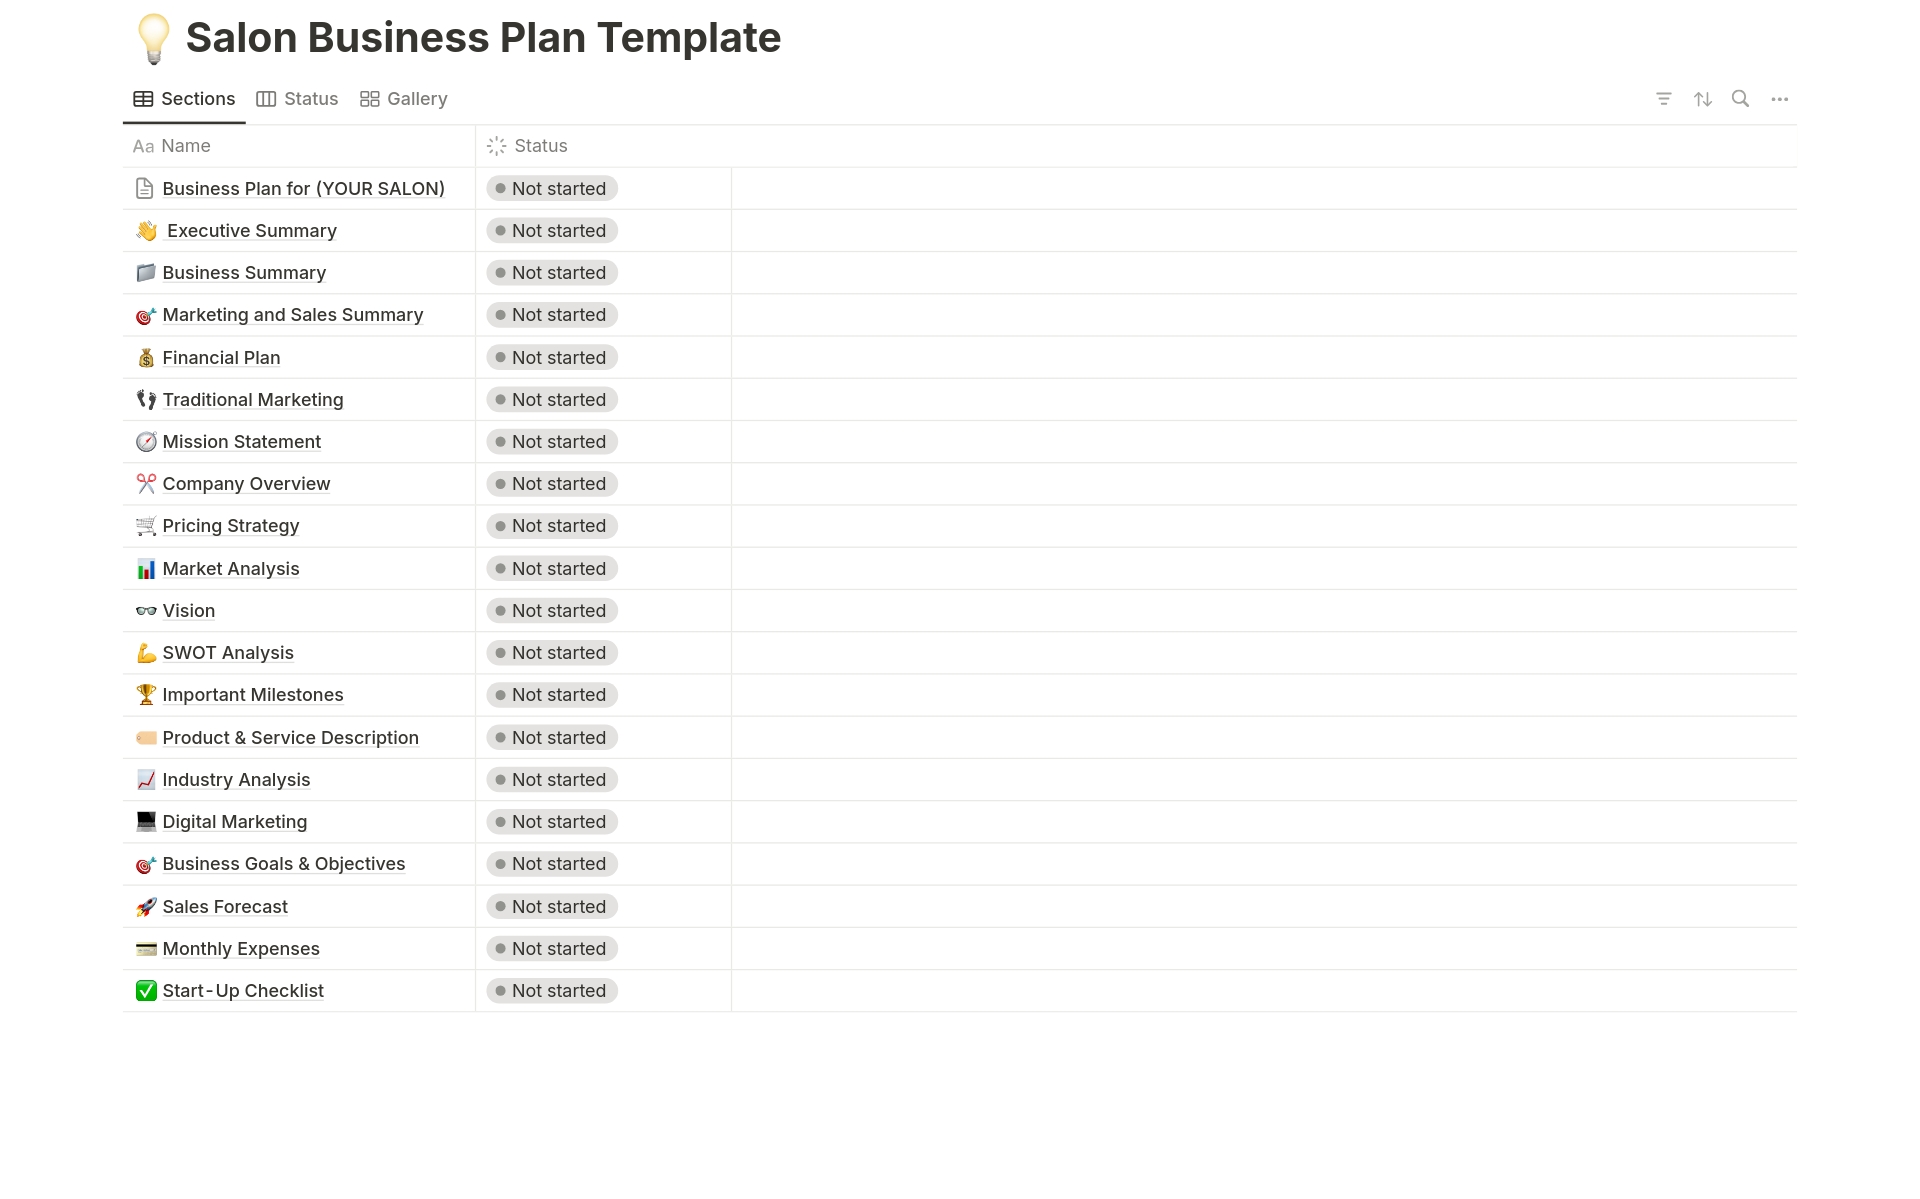 A template preview for The Salon Business Plan Guide and Checklist